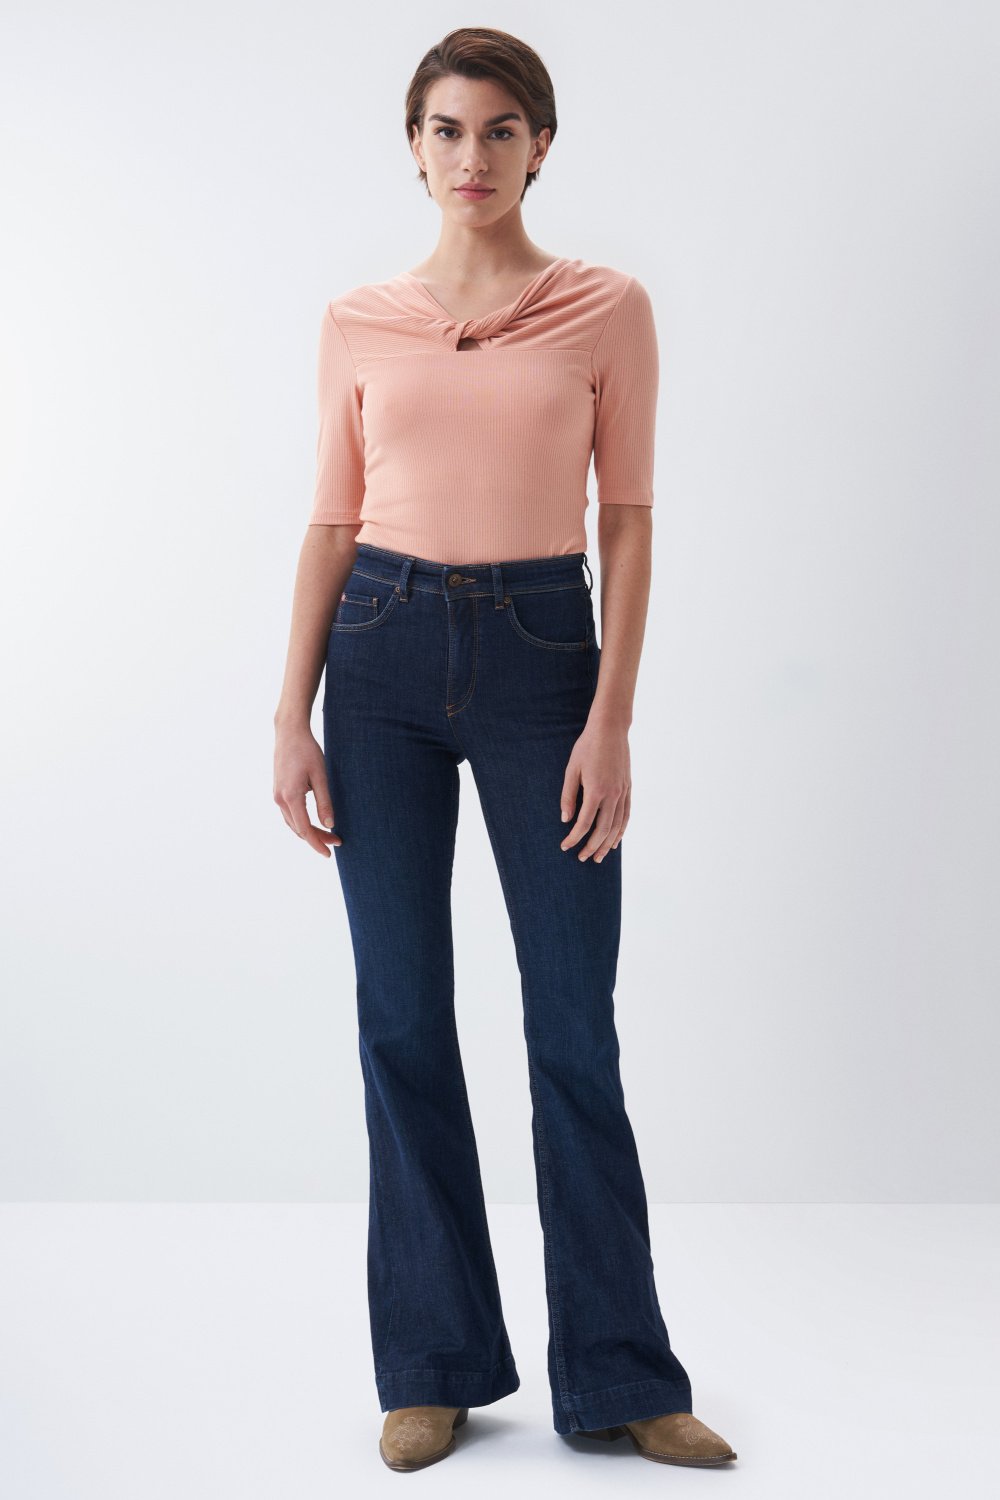 T-shirt with knot detail at neckline - Salsa